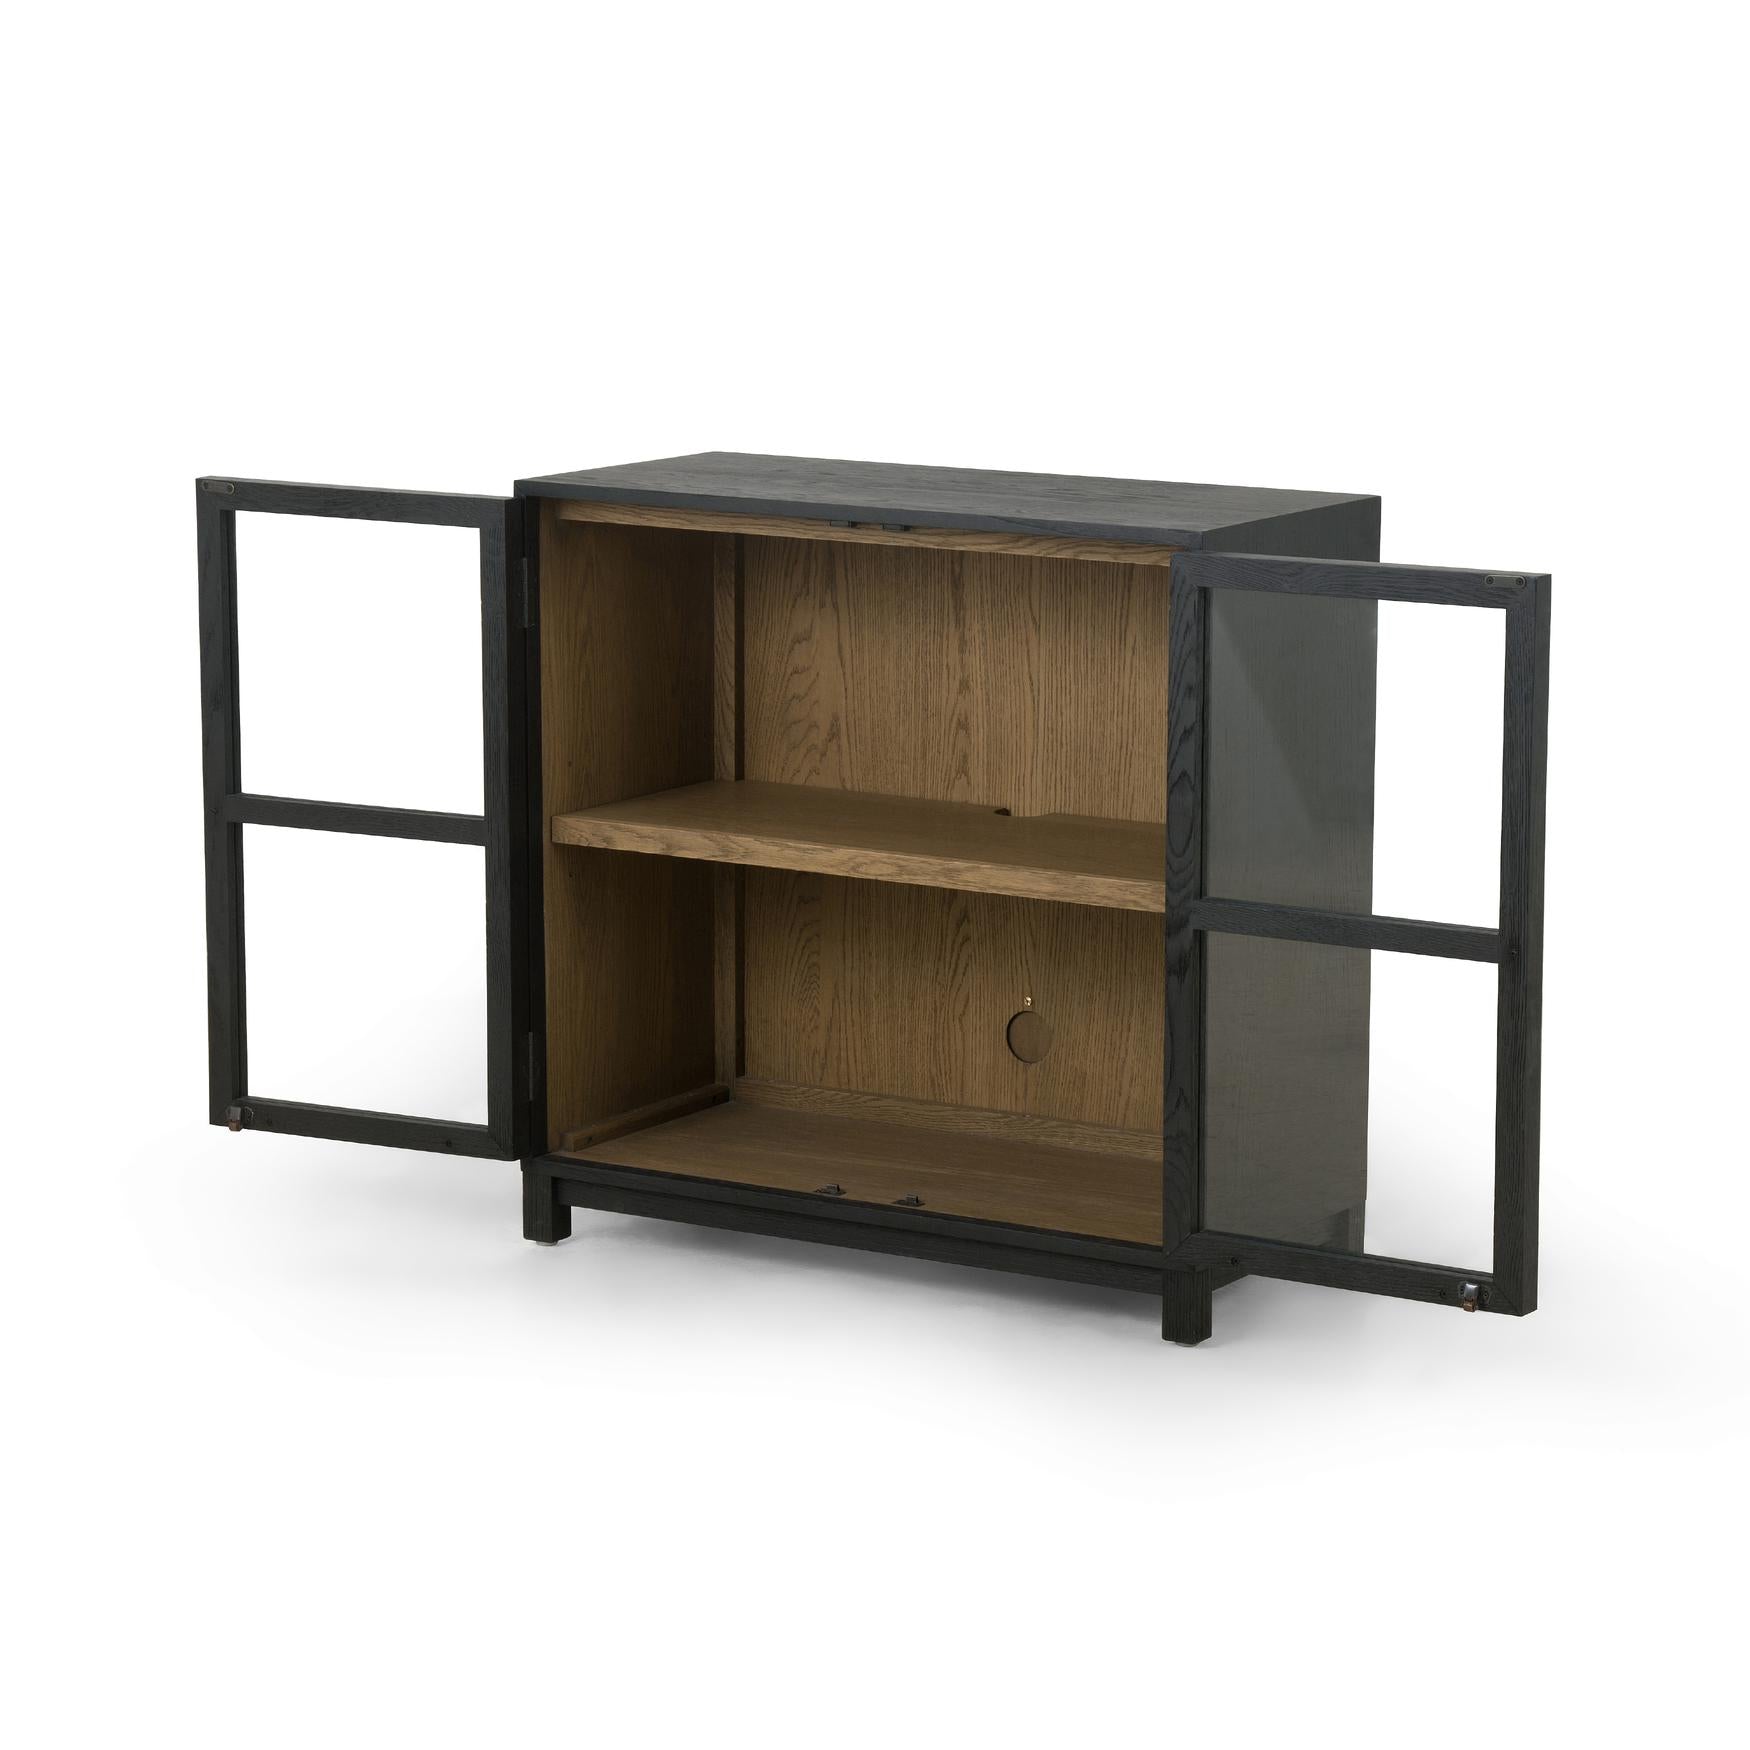 Millie Small Cabinet - StyleMeGHD - Small Black Cabinet